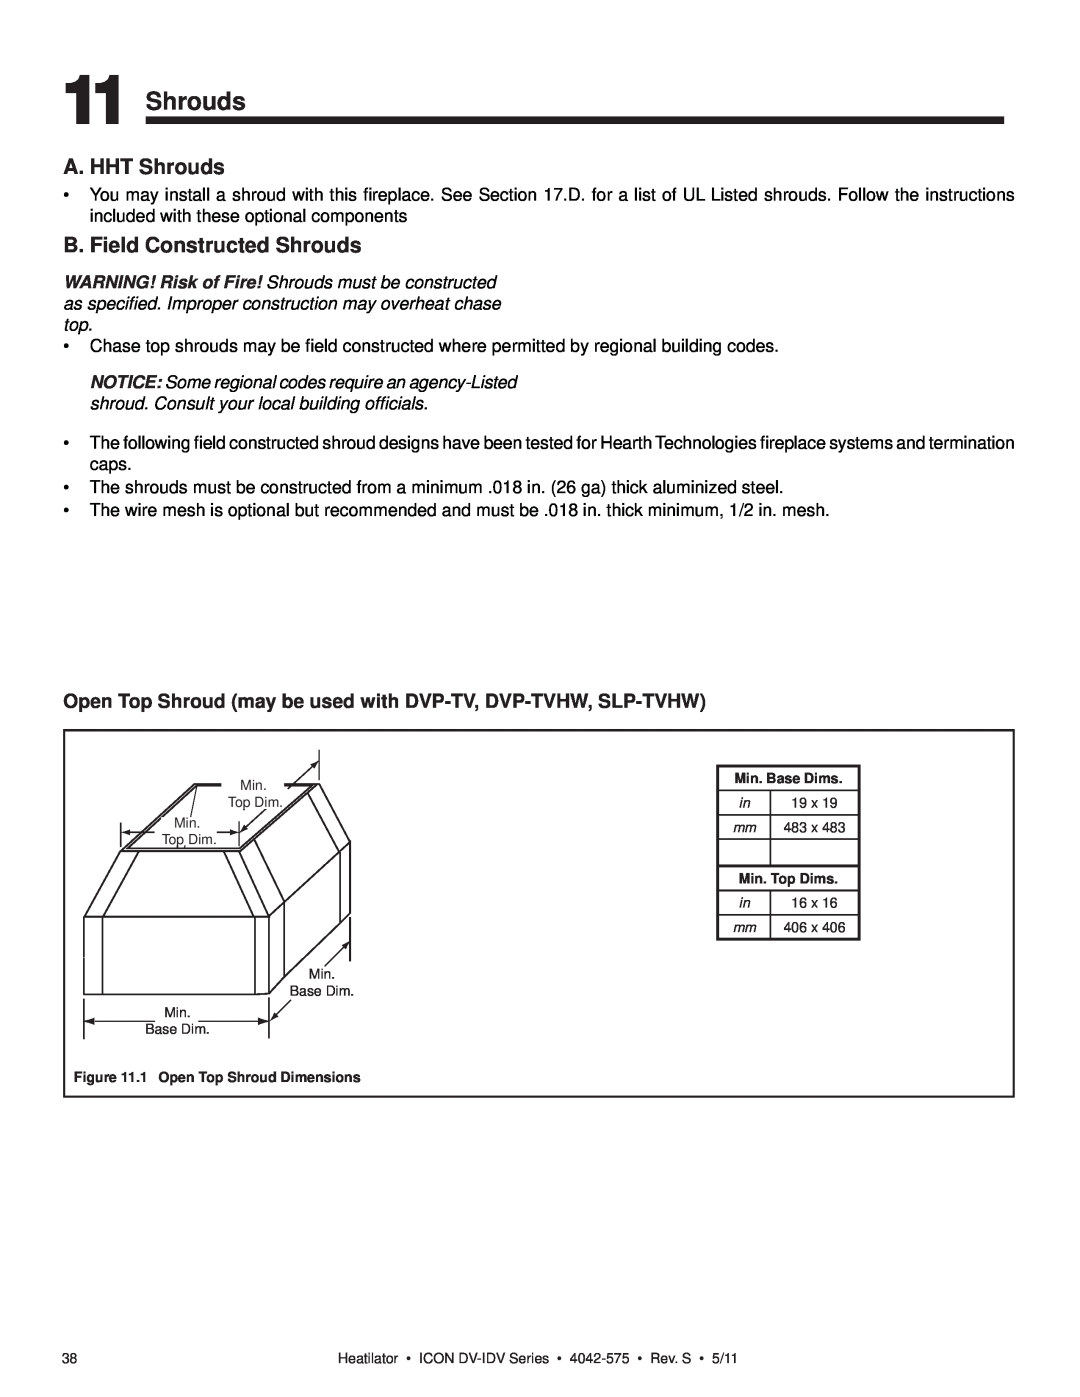 Heatiator IDV4833IT owner manual A. HHT Shrouds, B. Field Constructed Shrouds 